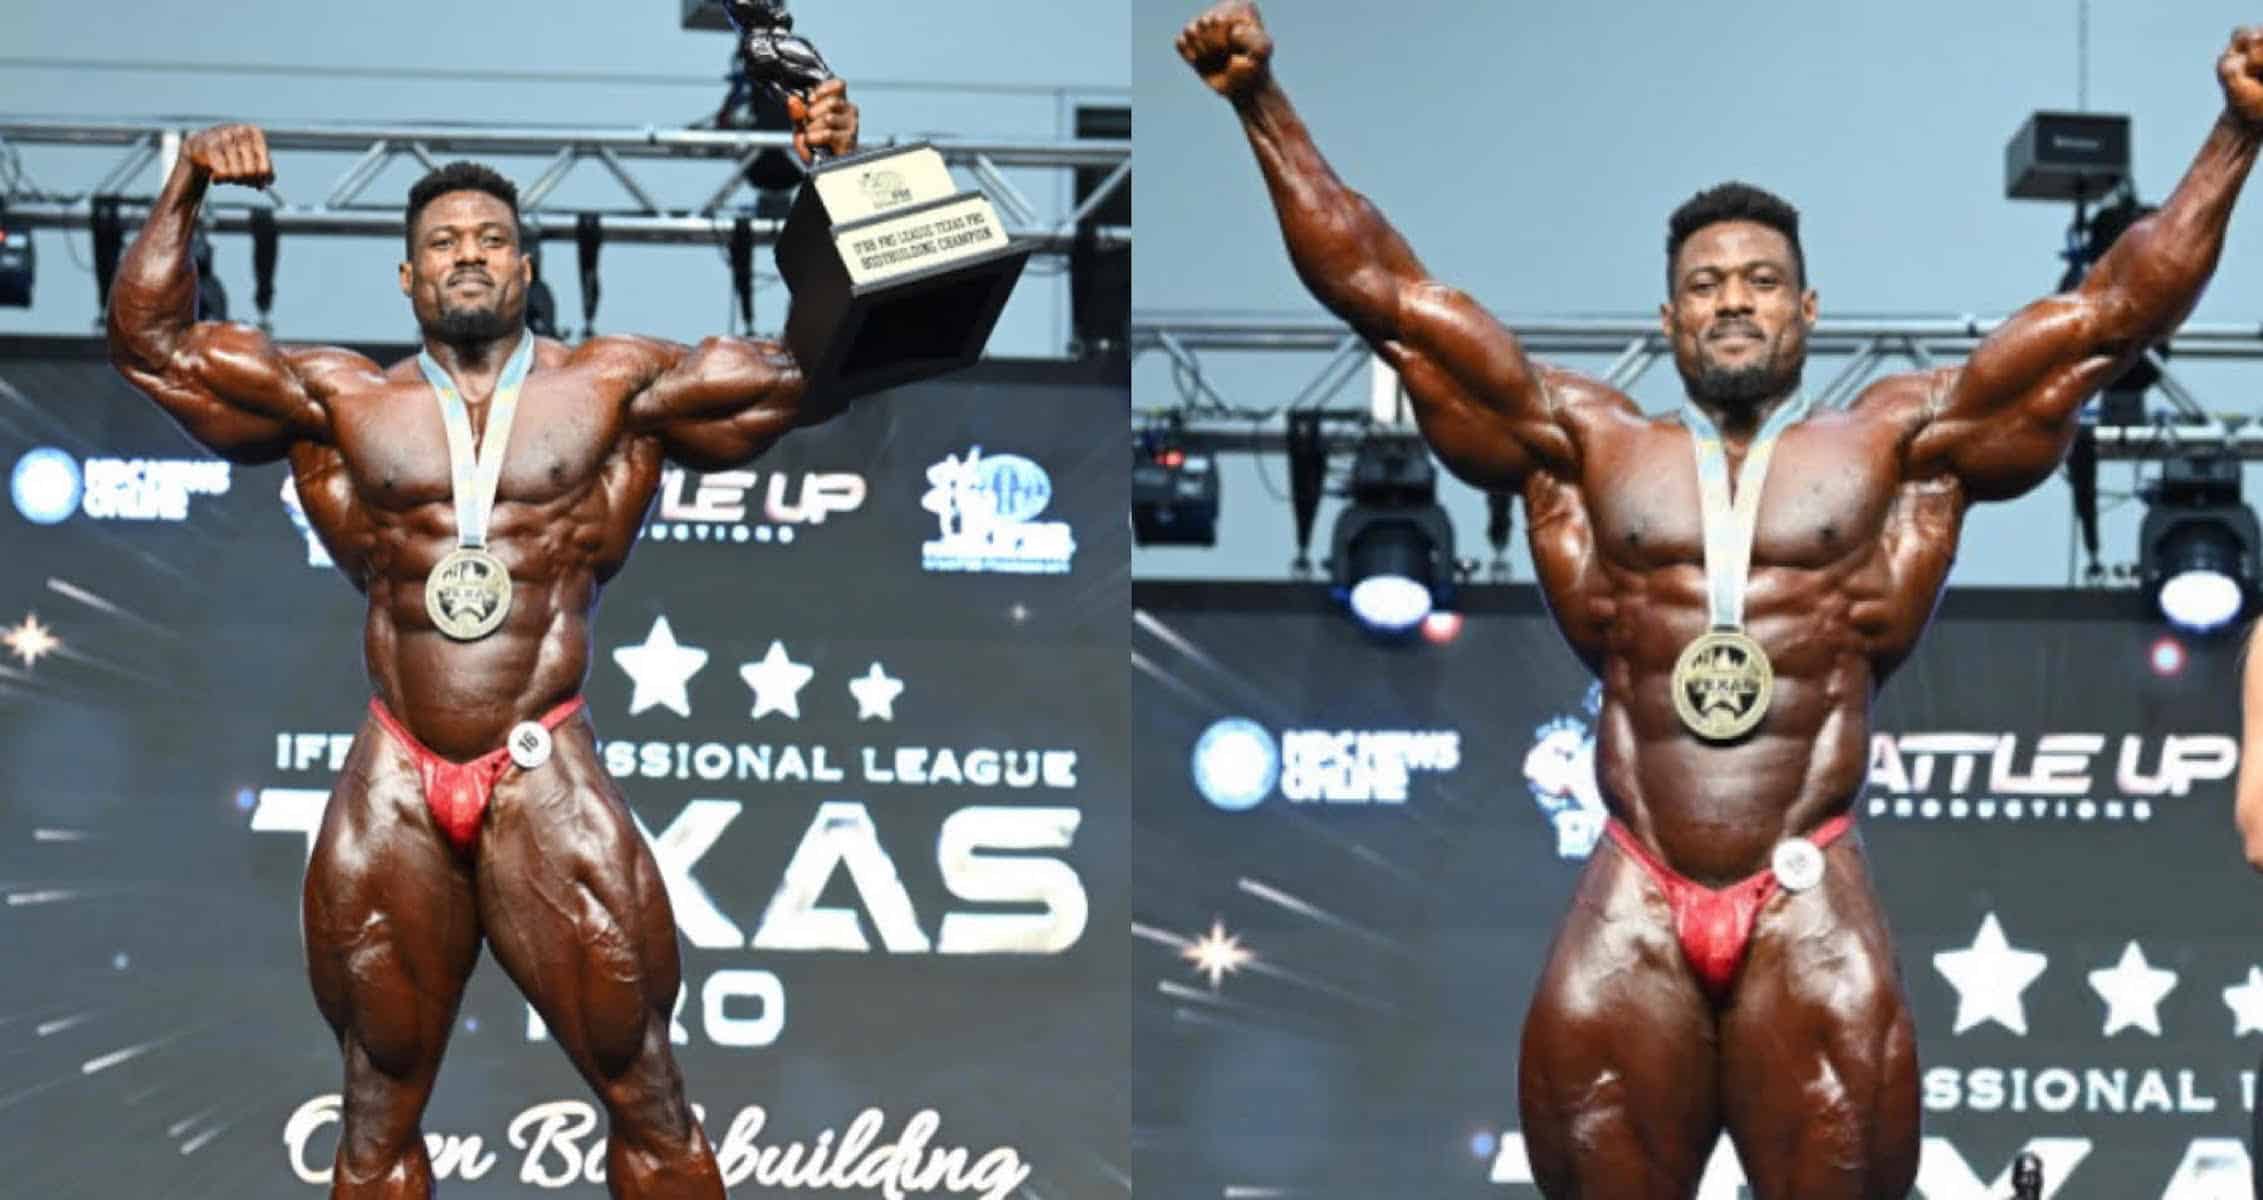 Andrew Jacked Announces Plan To Defend Title At 2023 Texas Pro